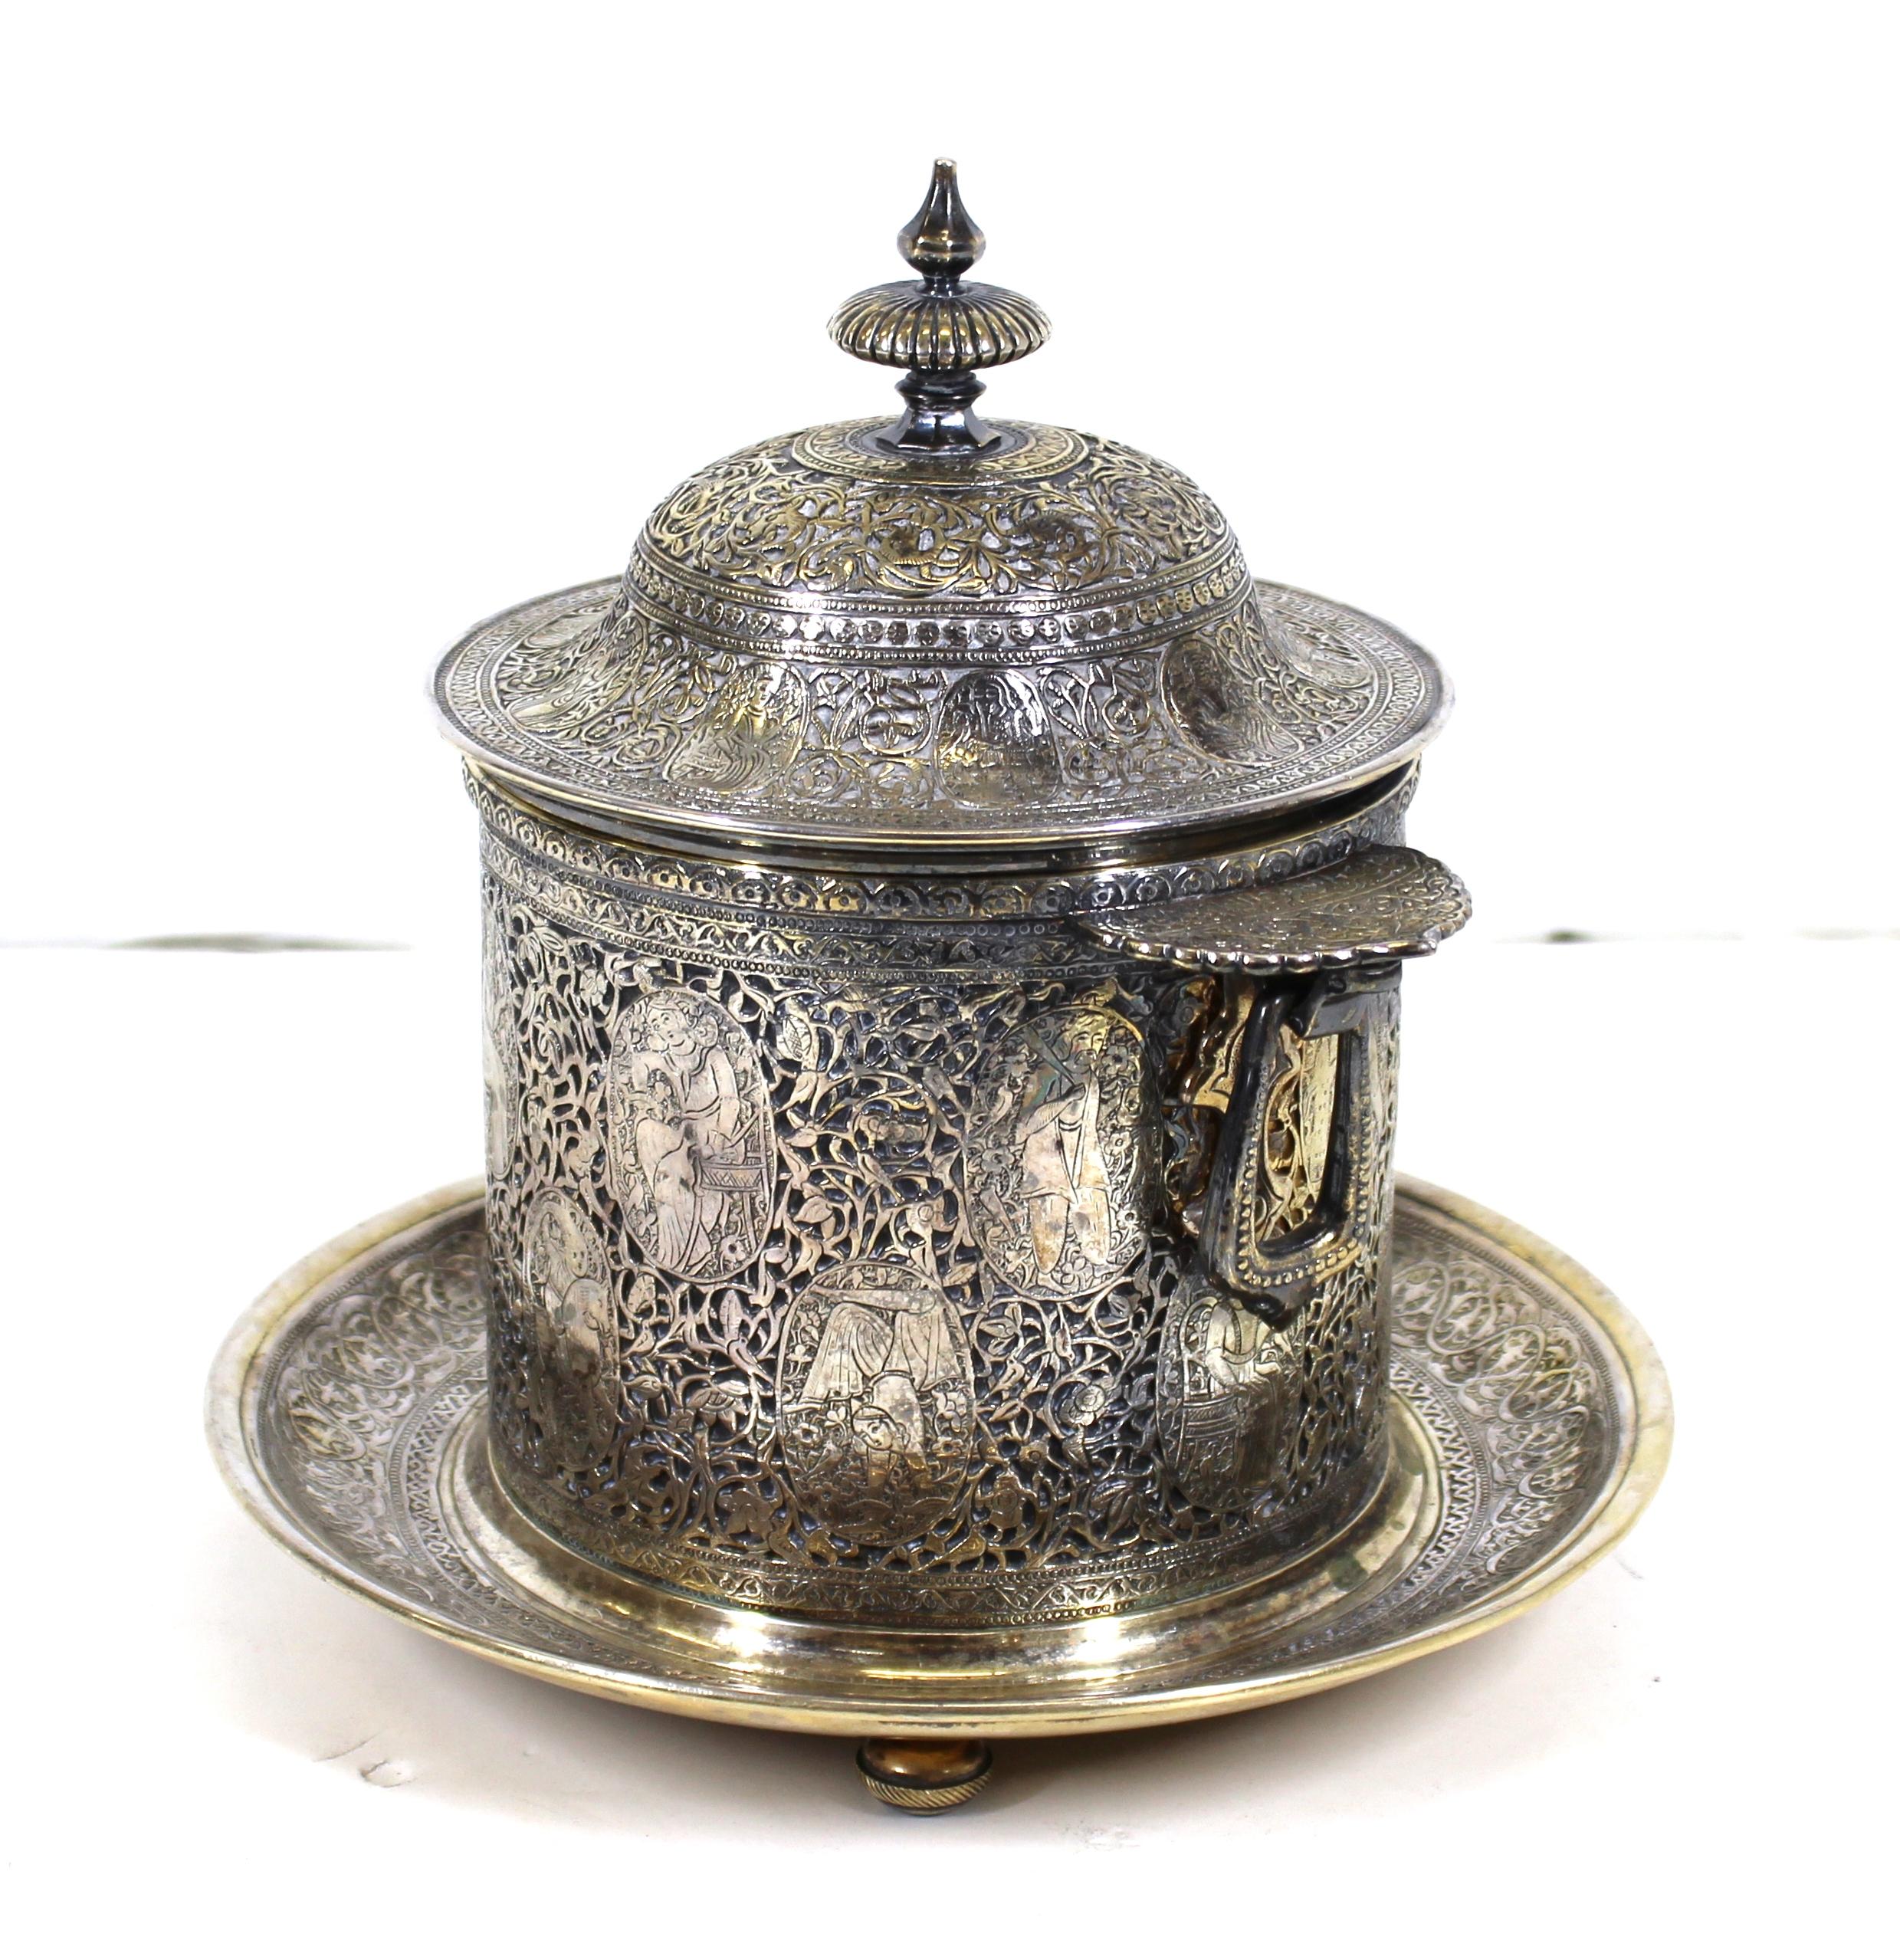 English Quajar style heavy silver plated biscuit box made by Mappin & Webb. The piece features a series of oblong portraits on the cylinder among elaborate foliage and arabesque motifs. Made in England in the late 19th century, likely during the